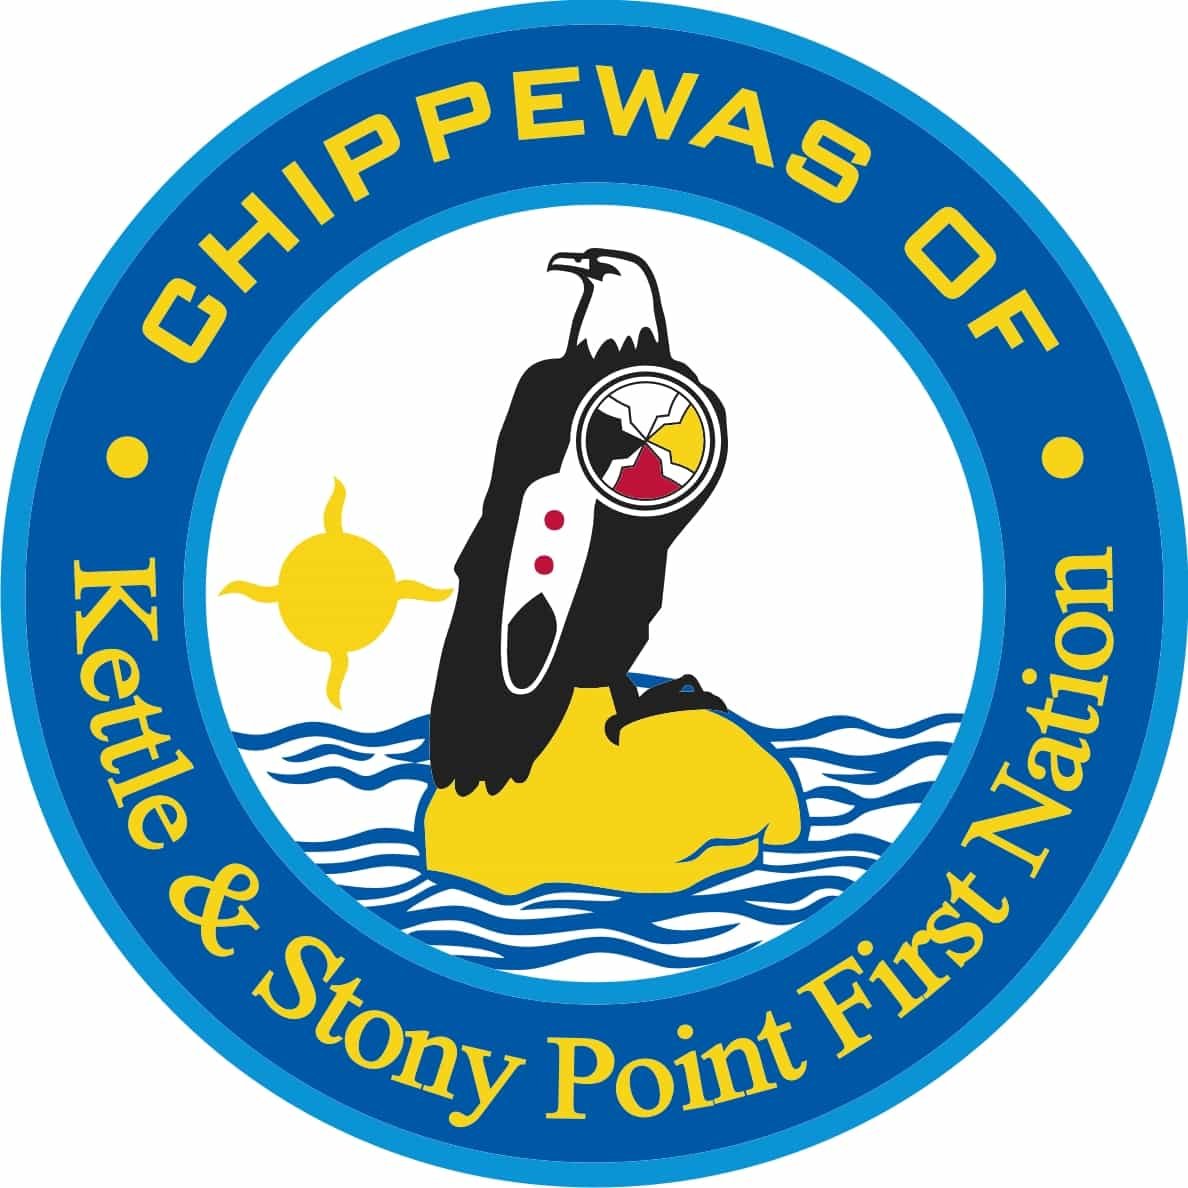 Chippewas of Kettle &amp; Stony Point First Nations